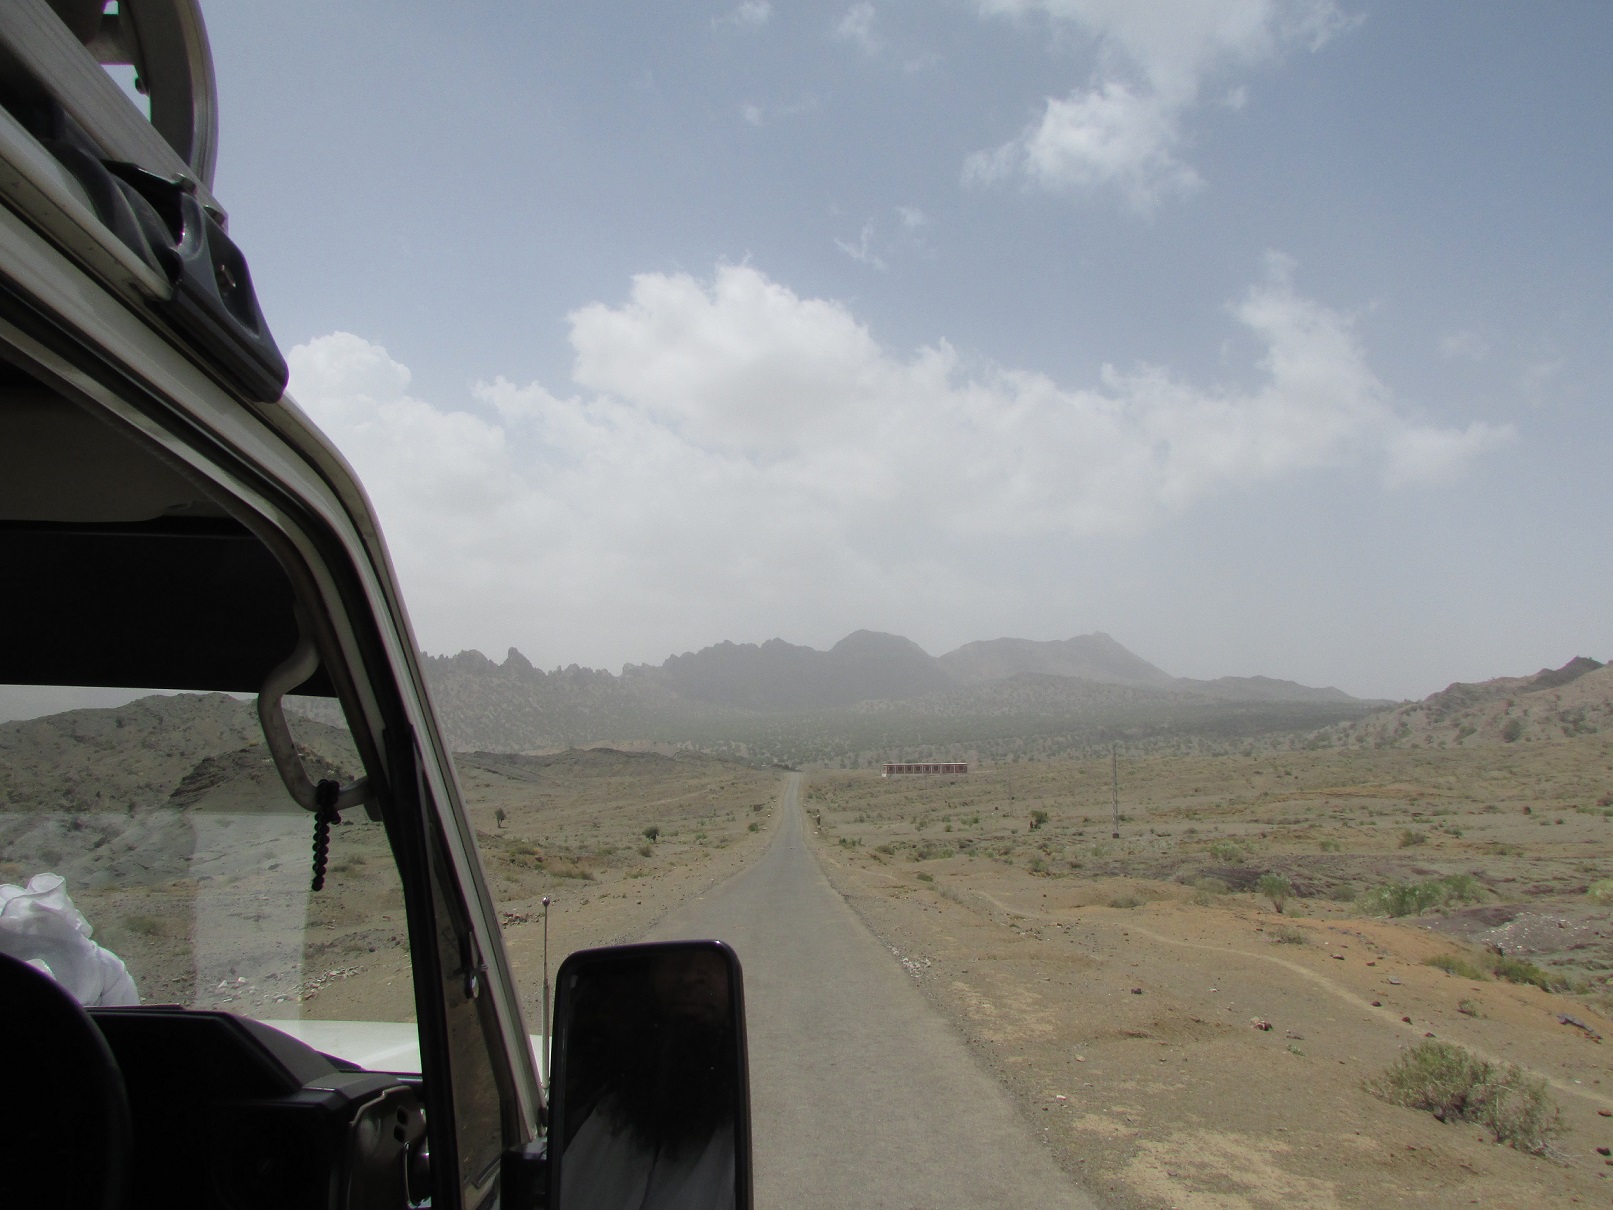 A desert view with mountains in the background and a road leading into the distance.